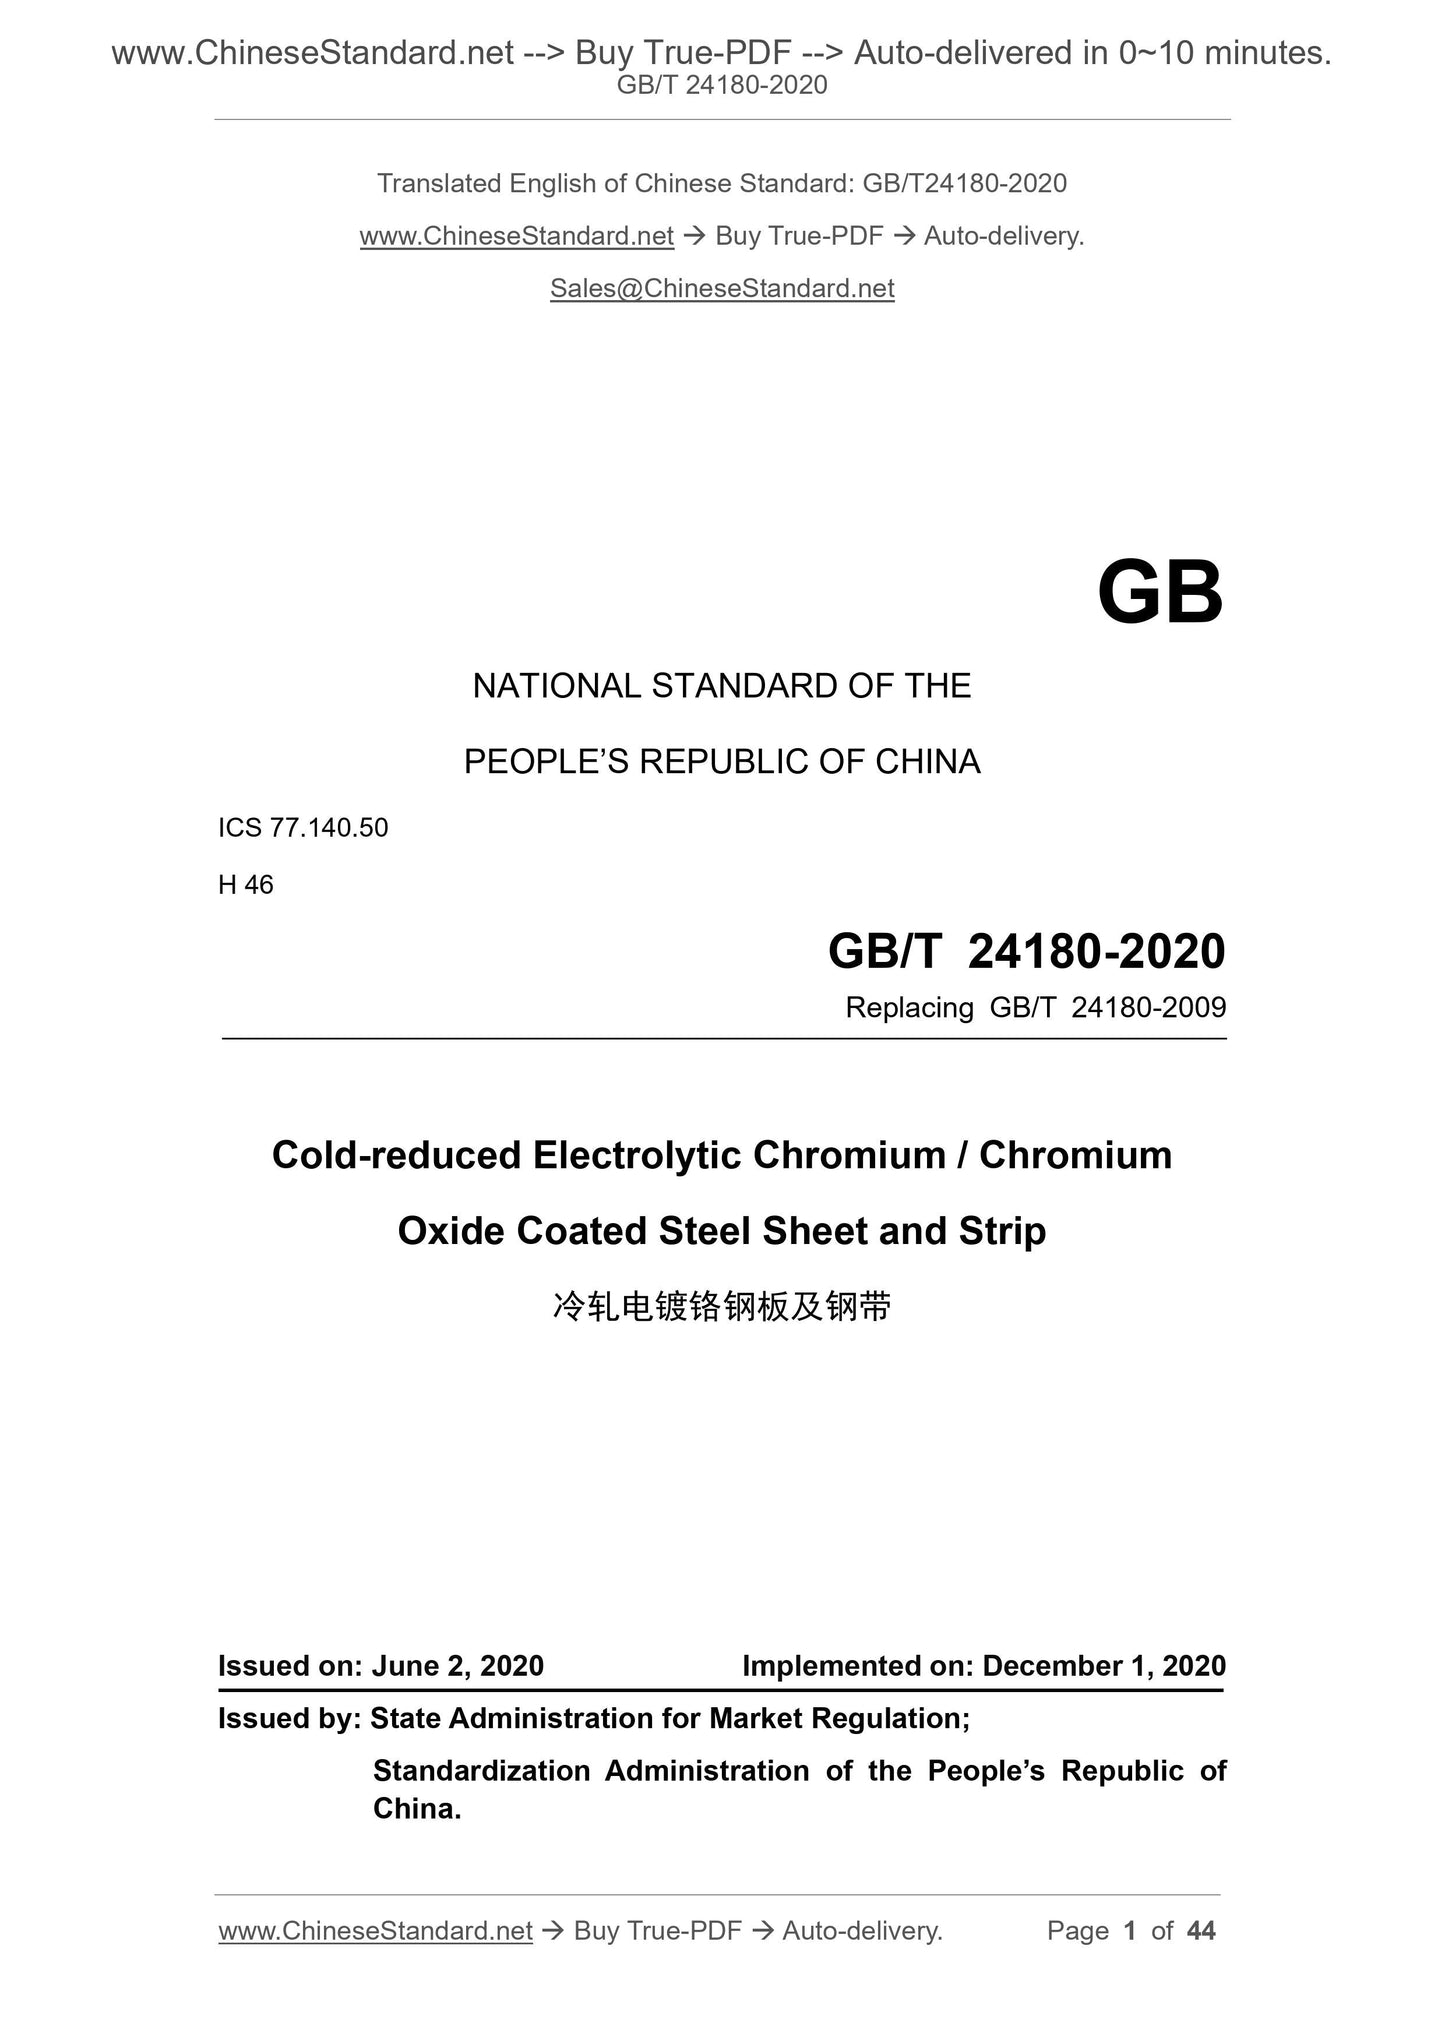 GB/T 24180-2020 Page 1